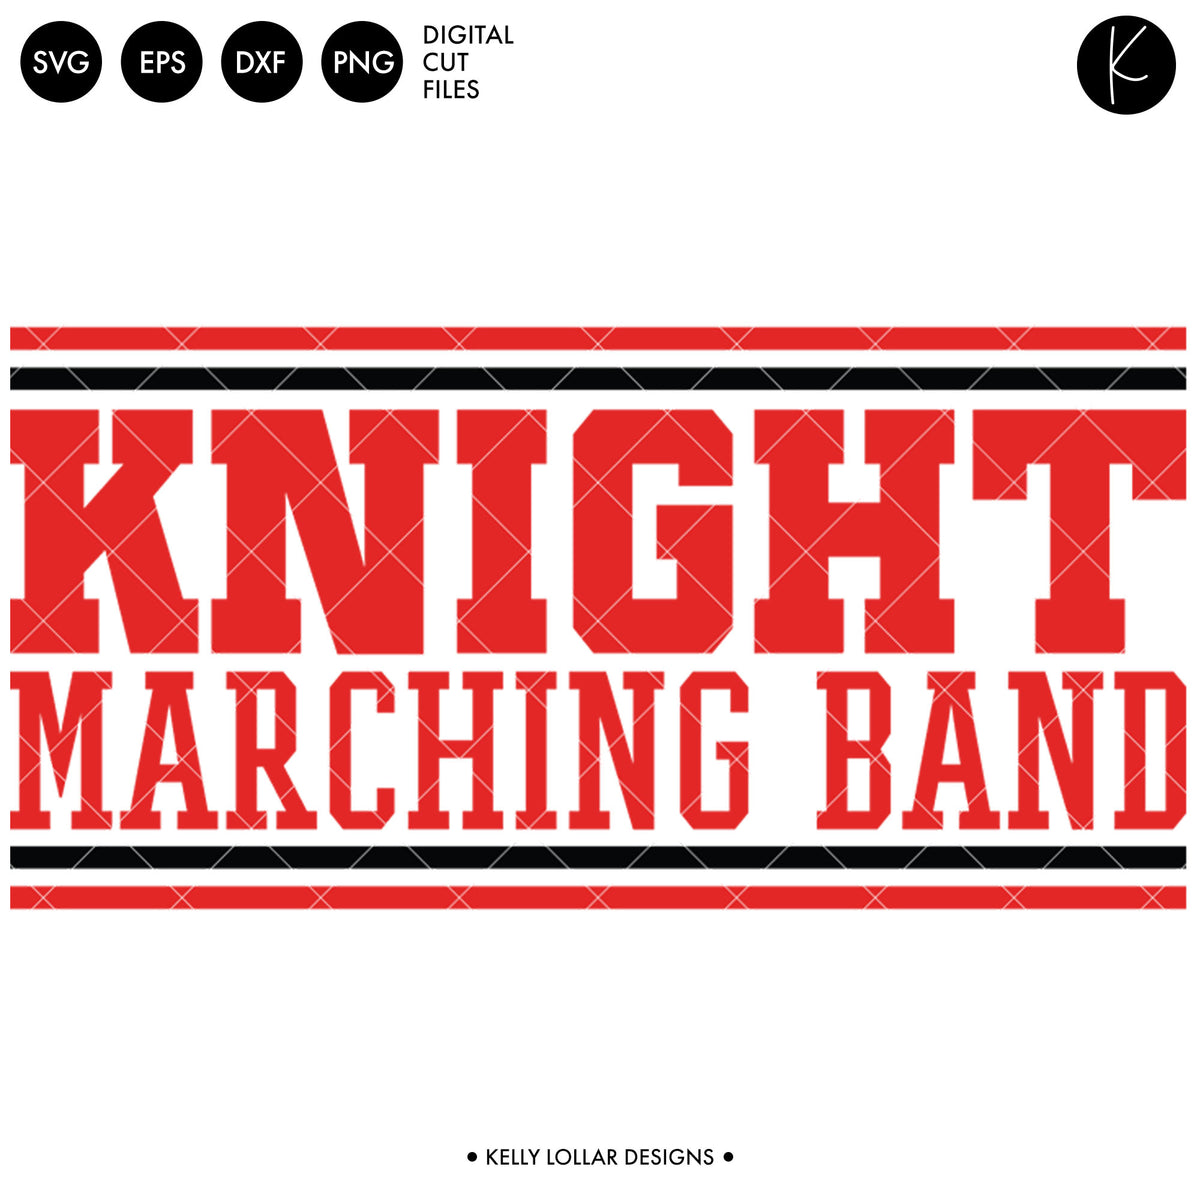 Knights Band Bundle | SVG DXF EPS PNG Cut Files